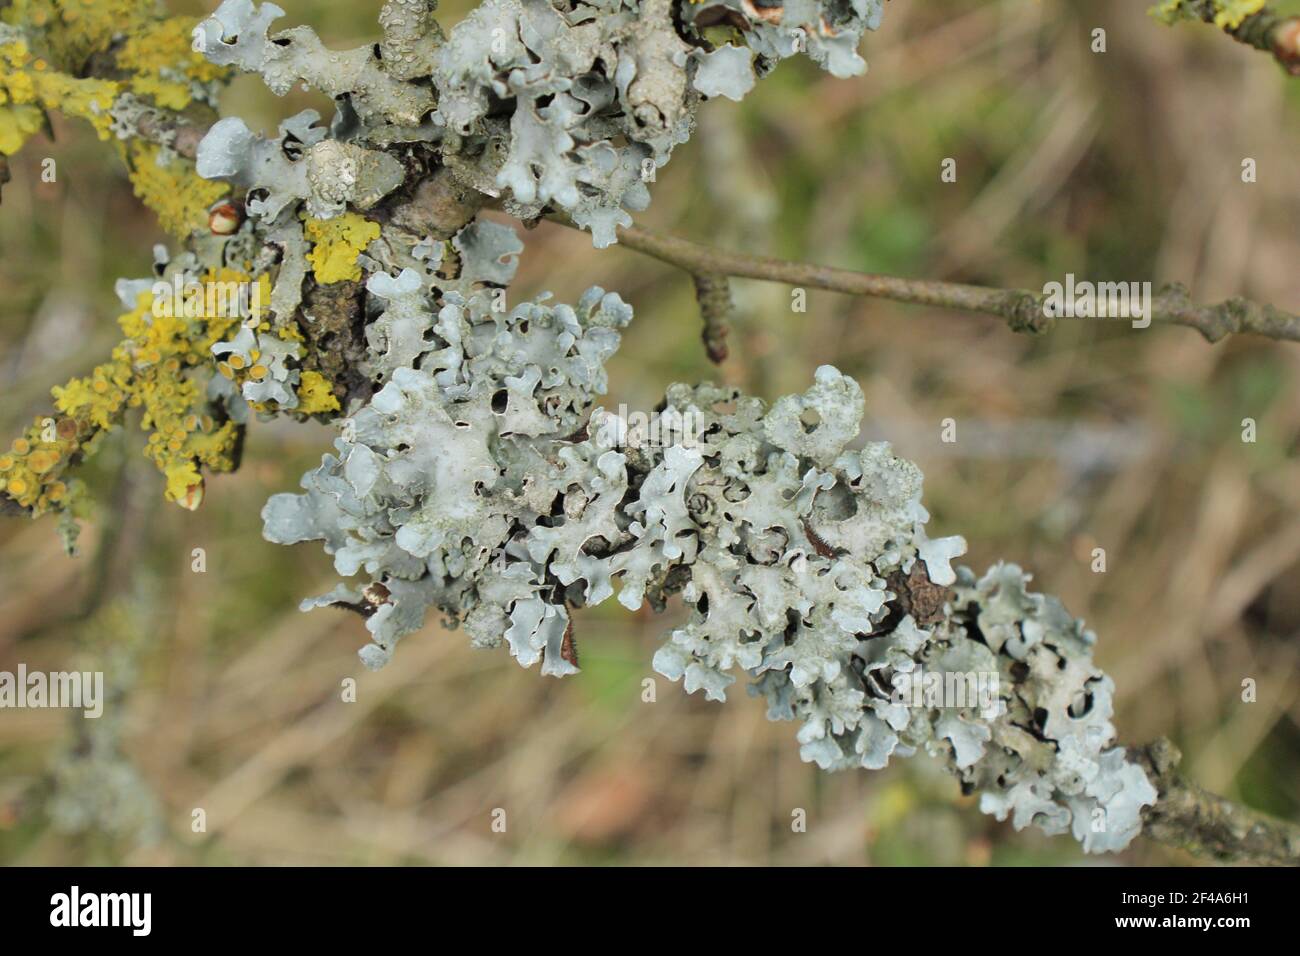 Foliose lichen. Symbiotic relationship between fungi and a photosynthetic partner concept Stock Photo